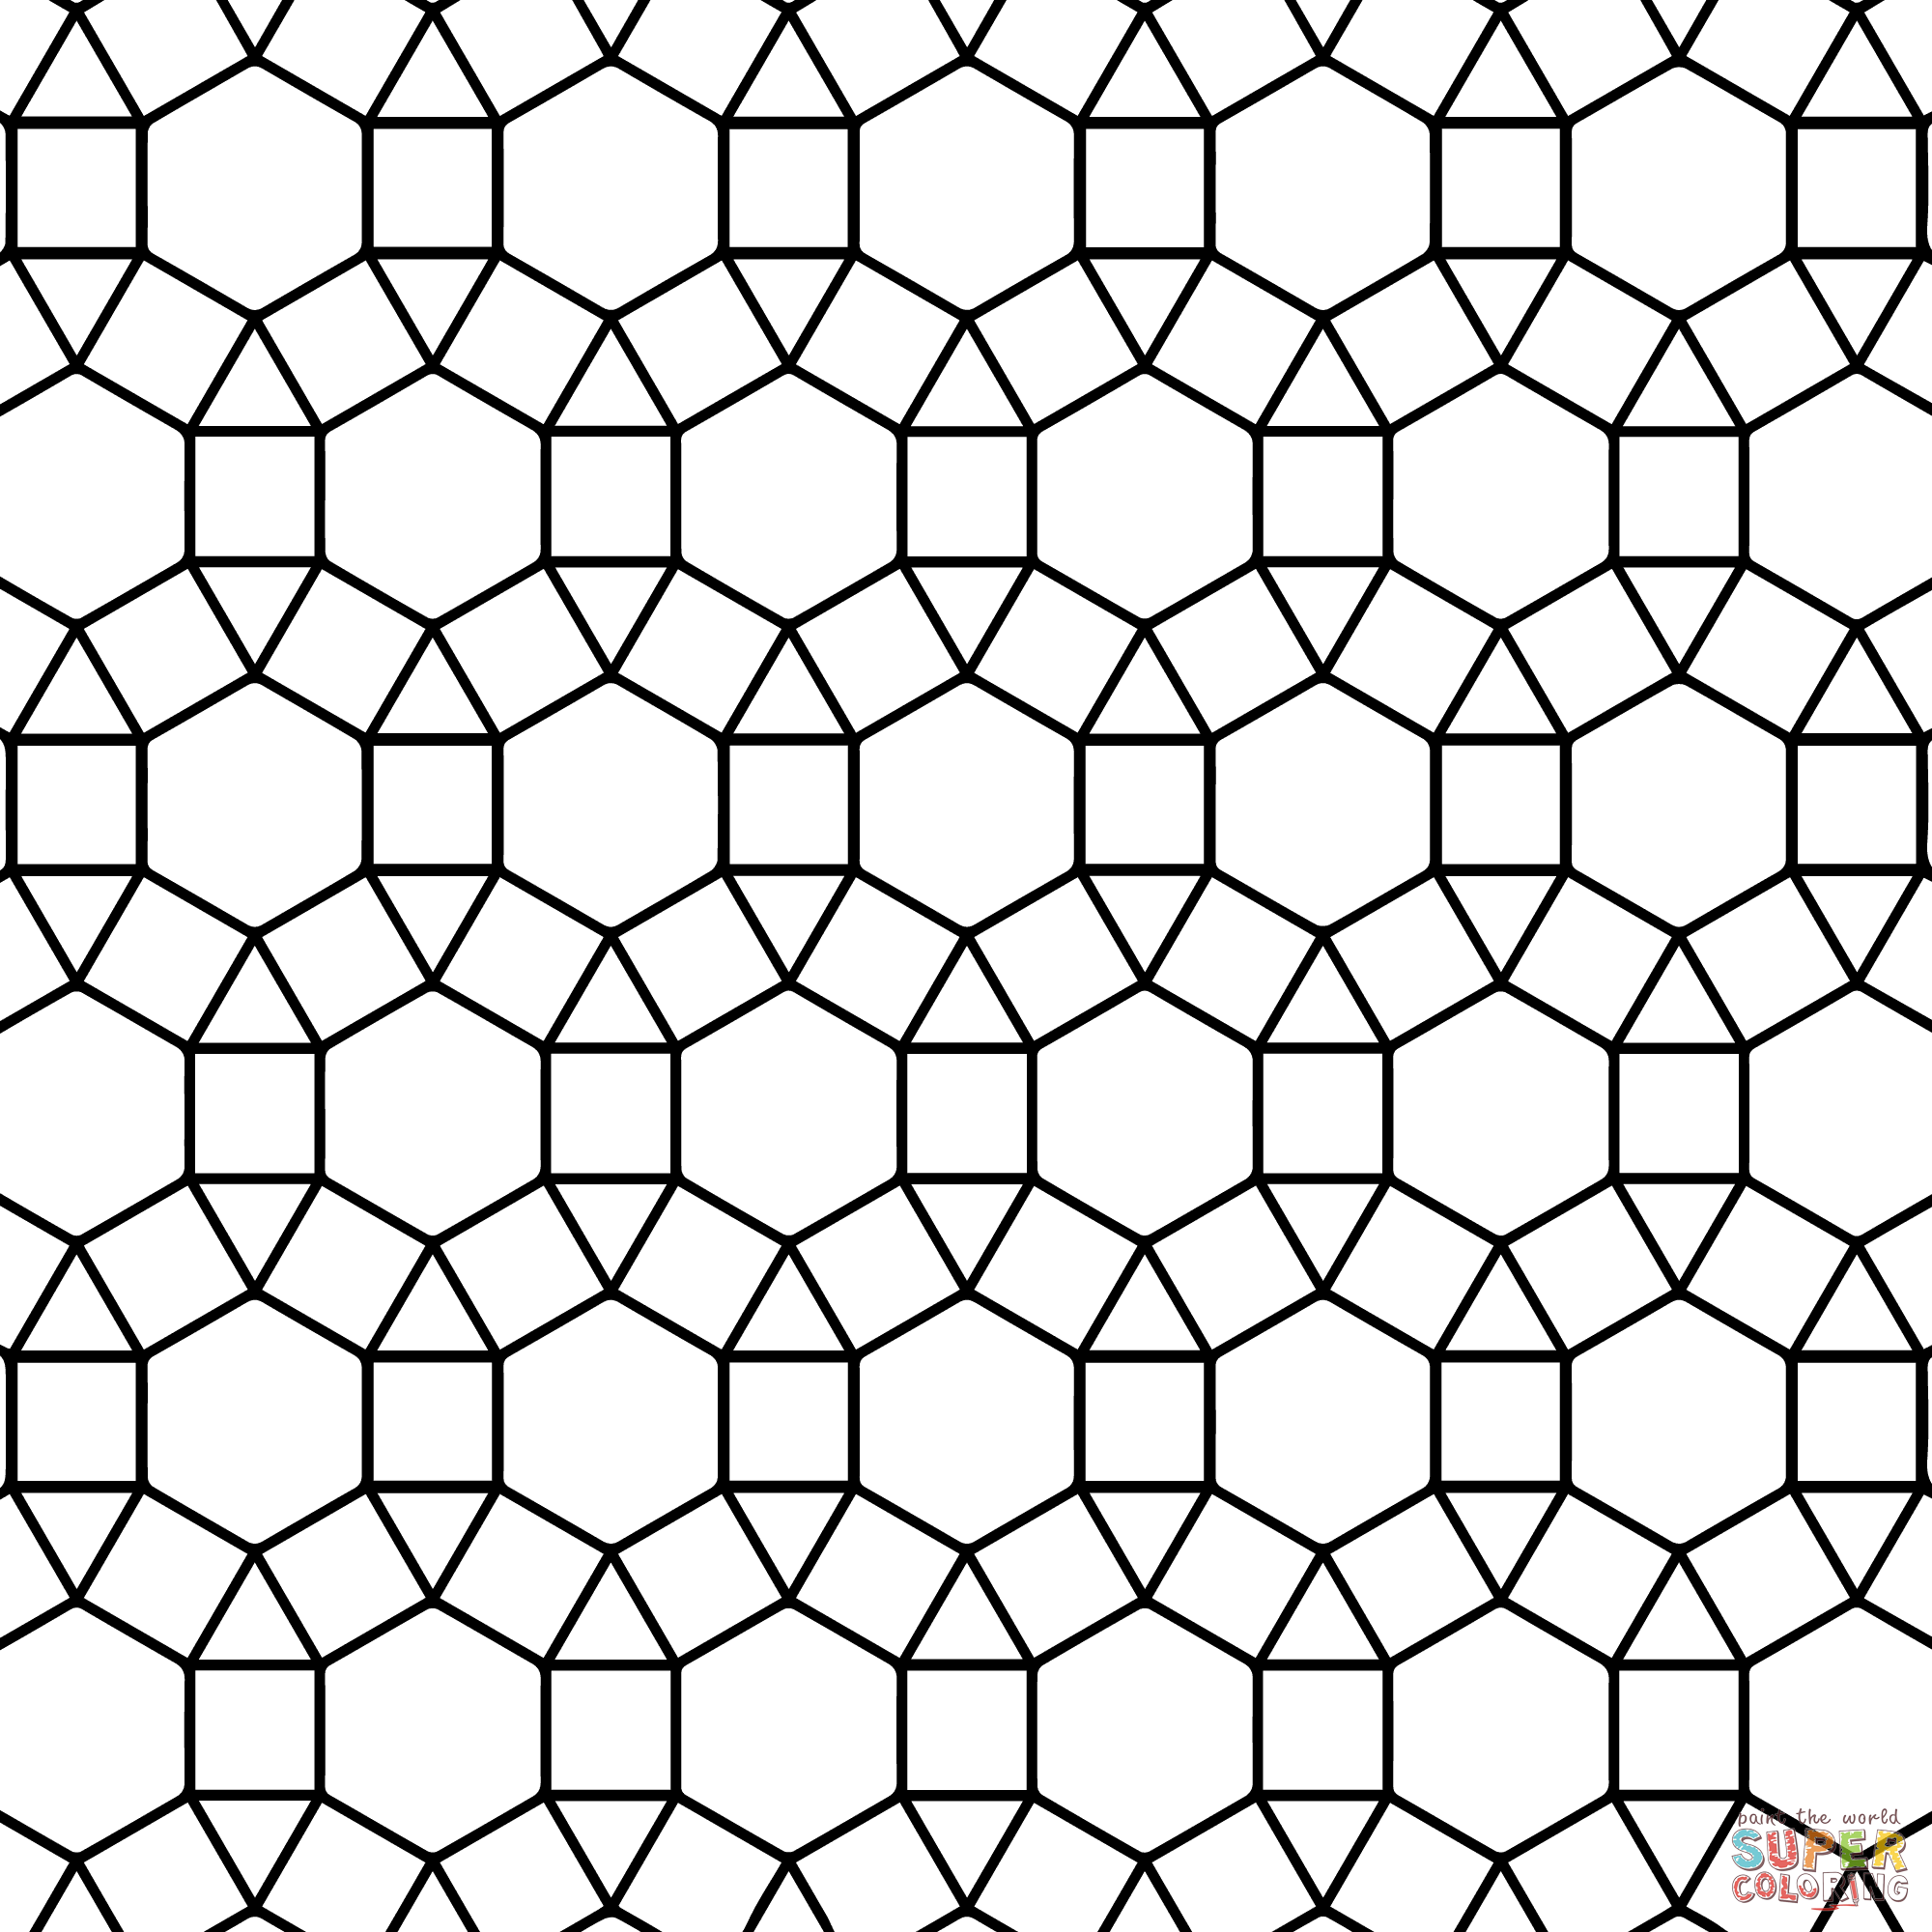 Coloring : Tessellation Coloring Pages Free Sheets Printable Geometry Dasho  Print Patterns Worksheets Tessellation Coloring Pages ~ Coloring Monica